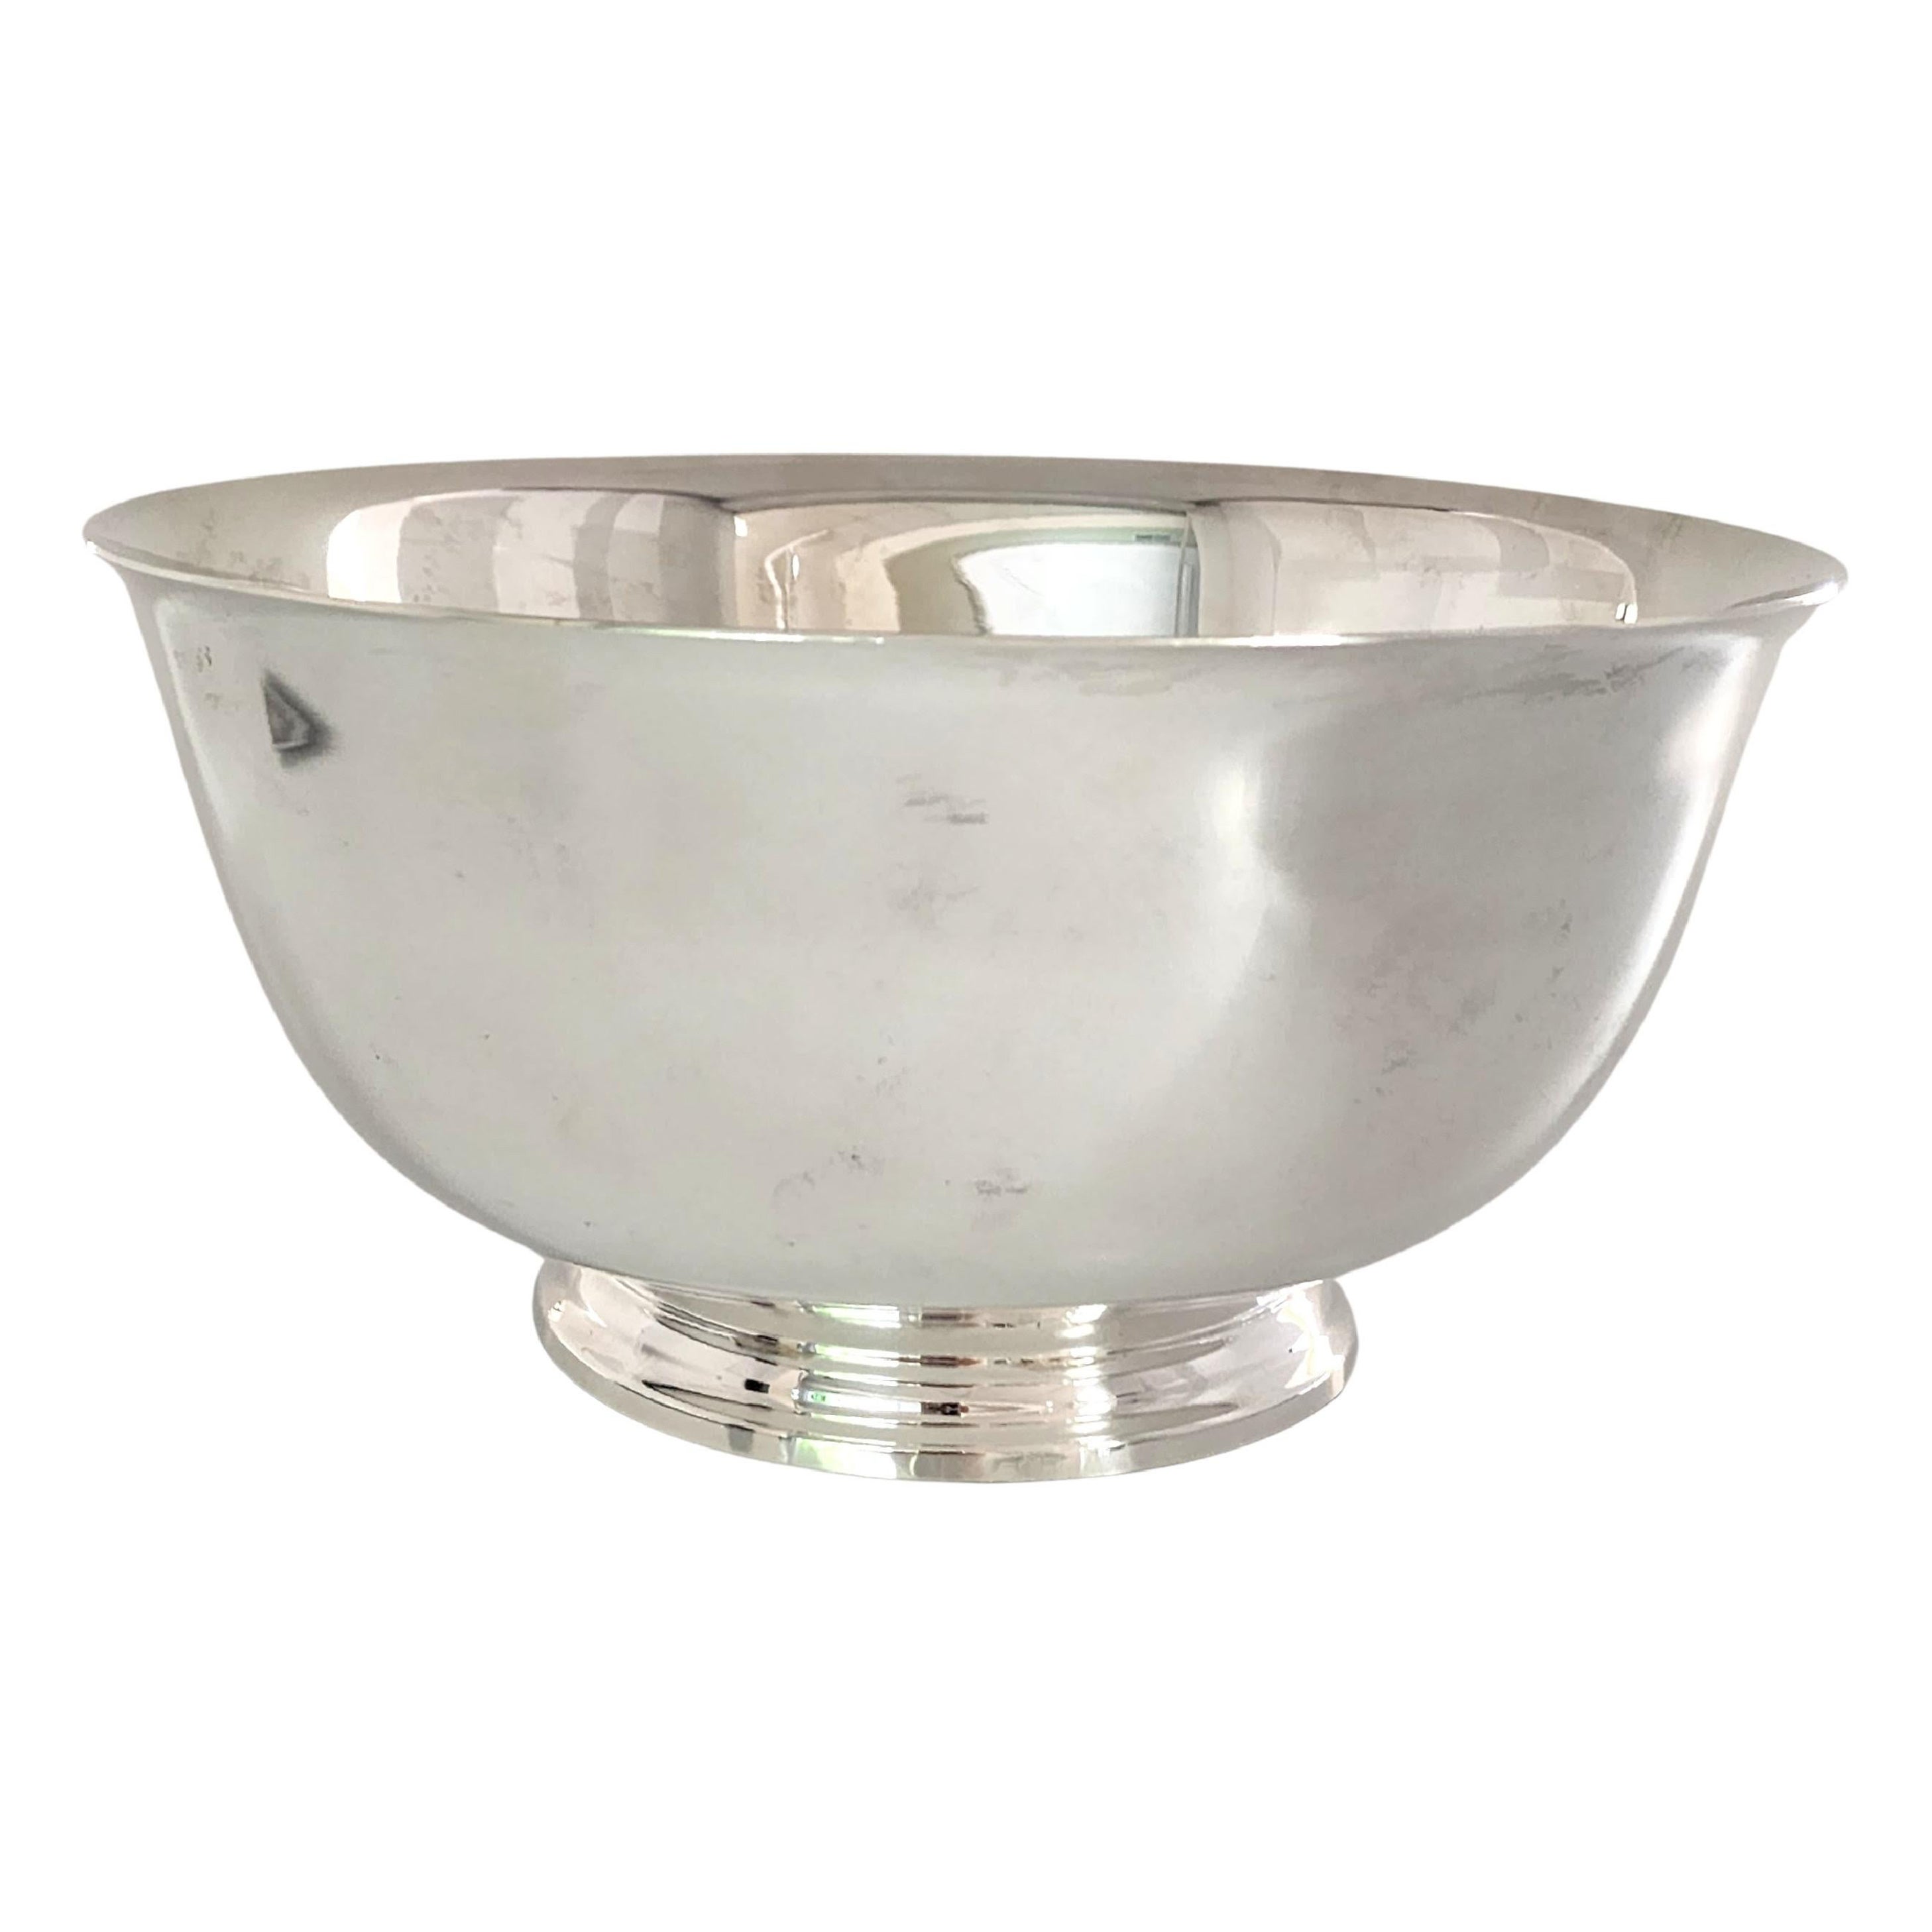 Tiffany & Co Sterling Silver 23618 Paul Revere Footed Bowl with Box